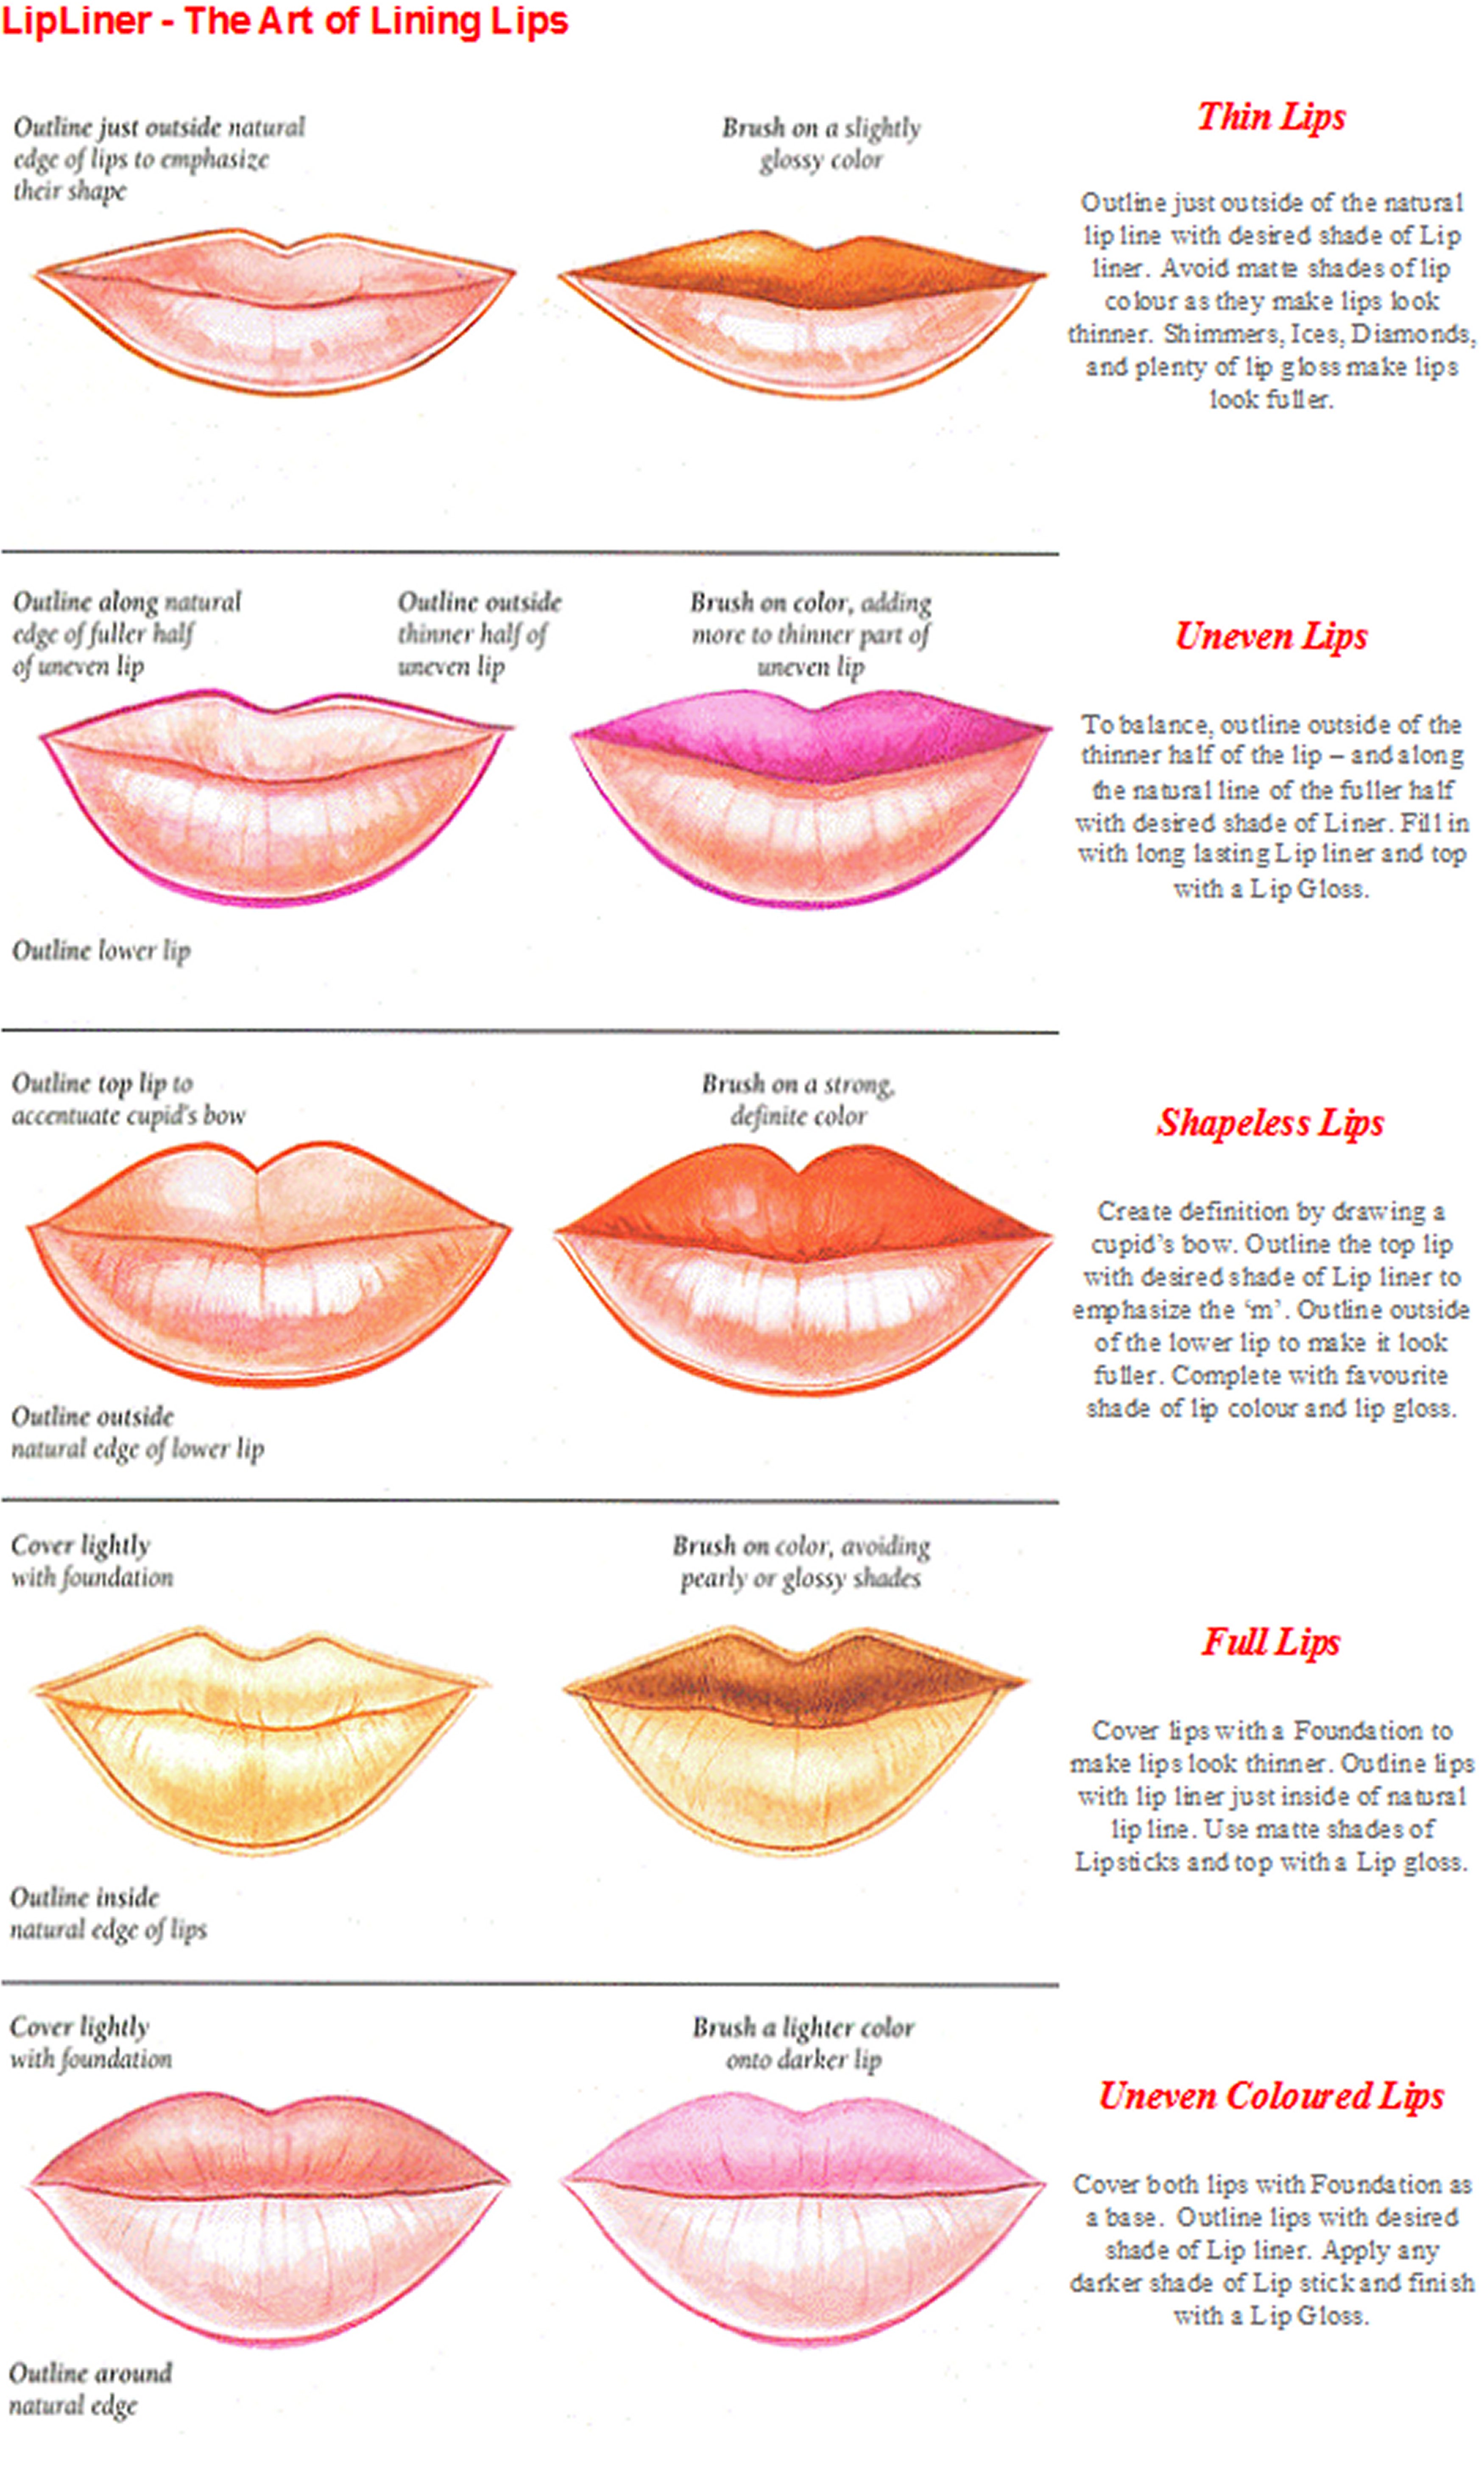 reshaping your lips the art of lip lining how to line lips thin lips lip shapes